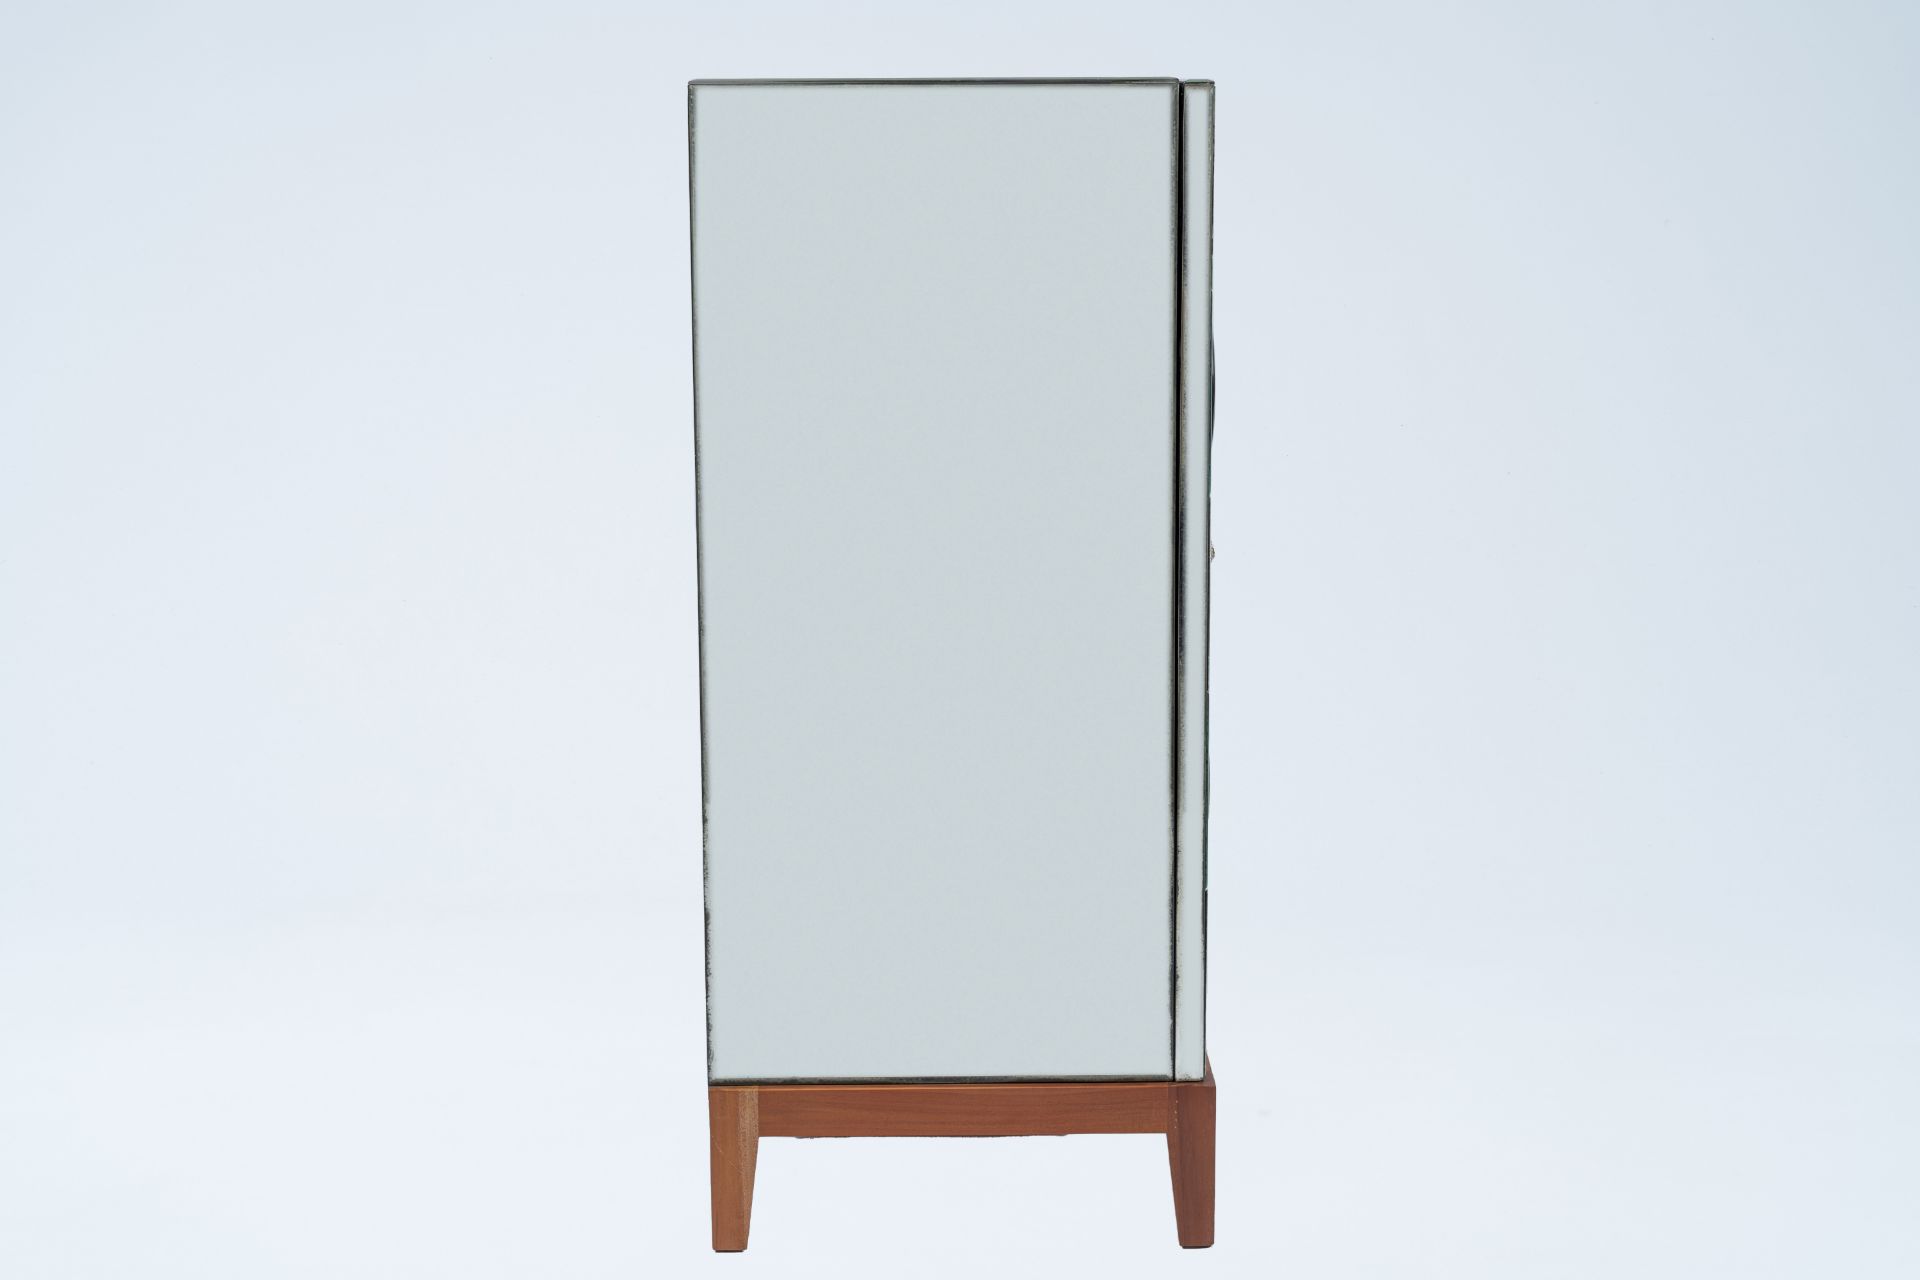 Olivier De Schrijver (1958): A 'Special Olivier' two-door cabinet with antique glass and lined with - Image 4 of 7